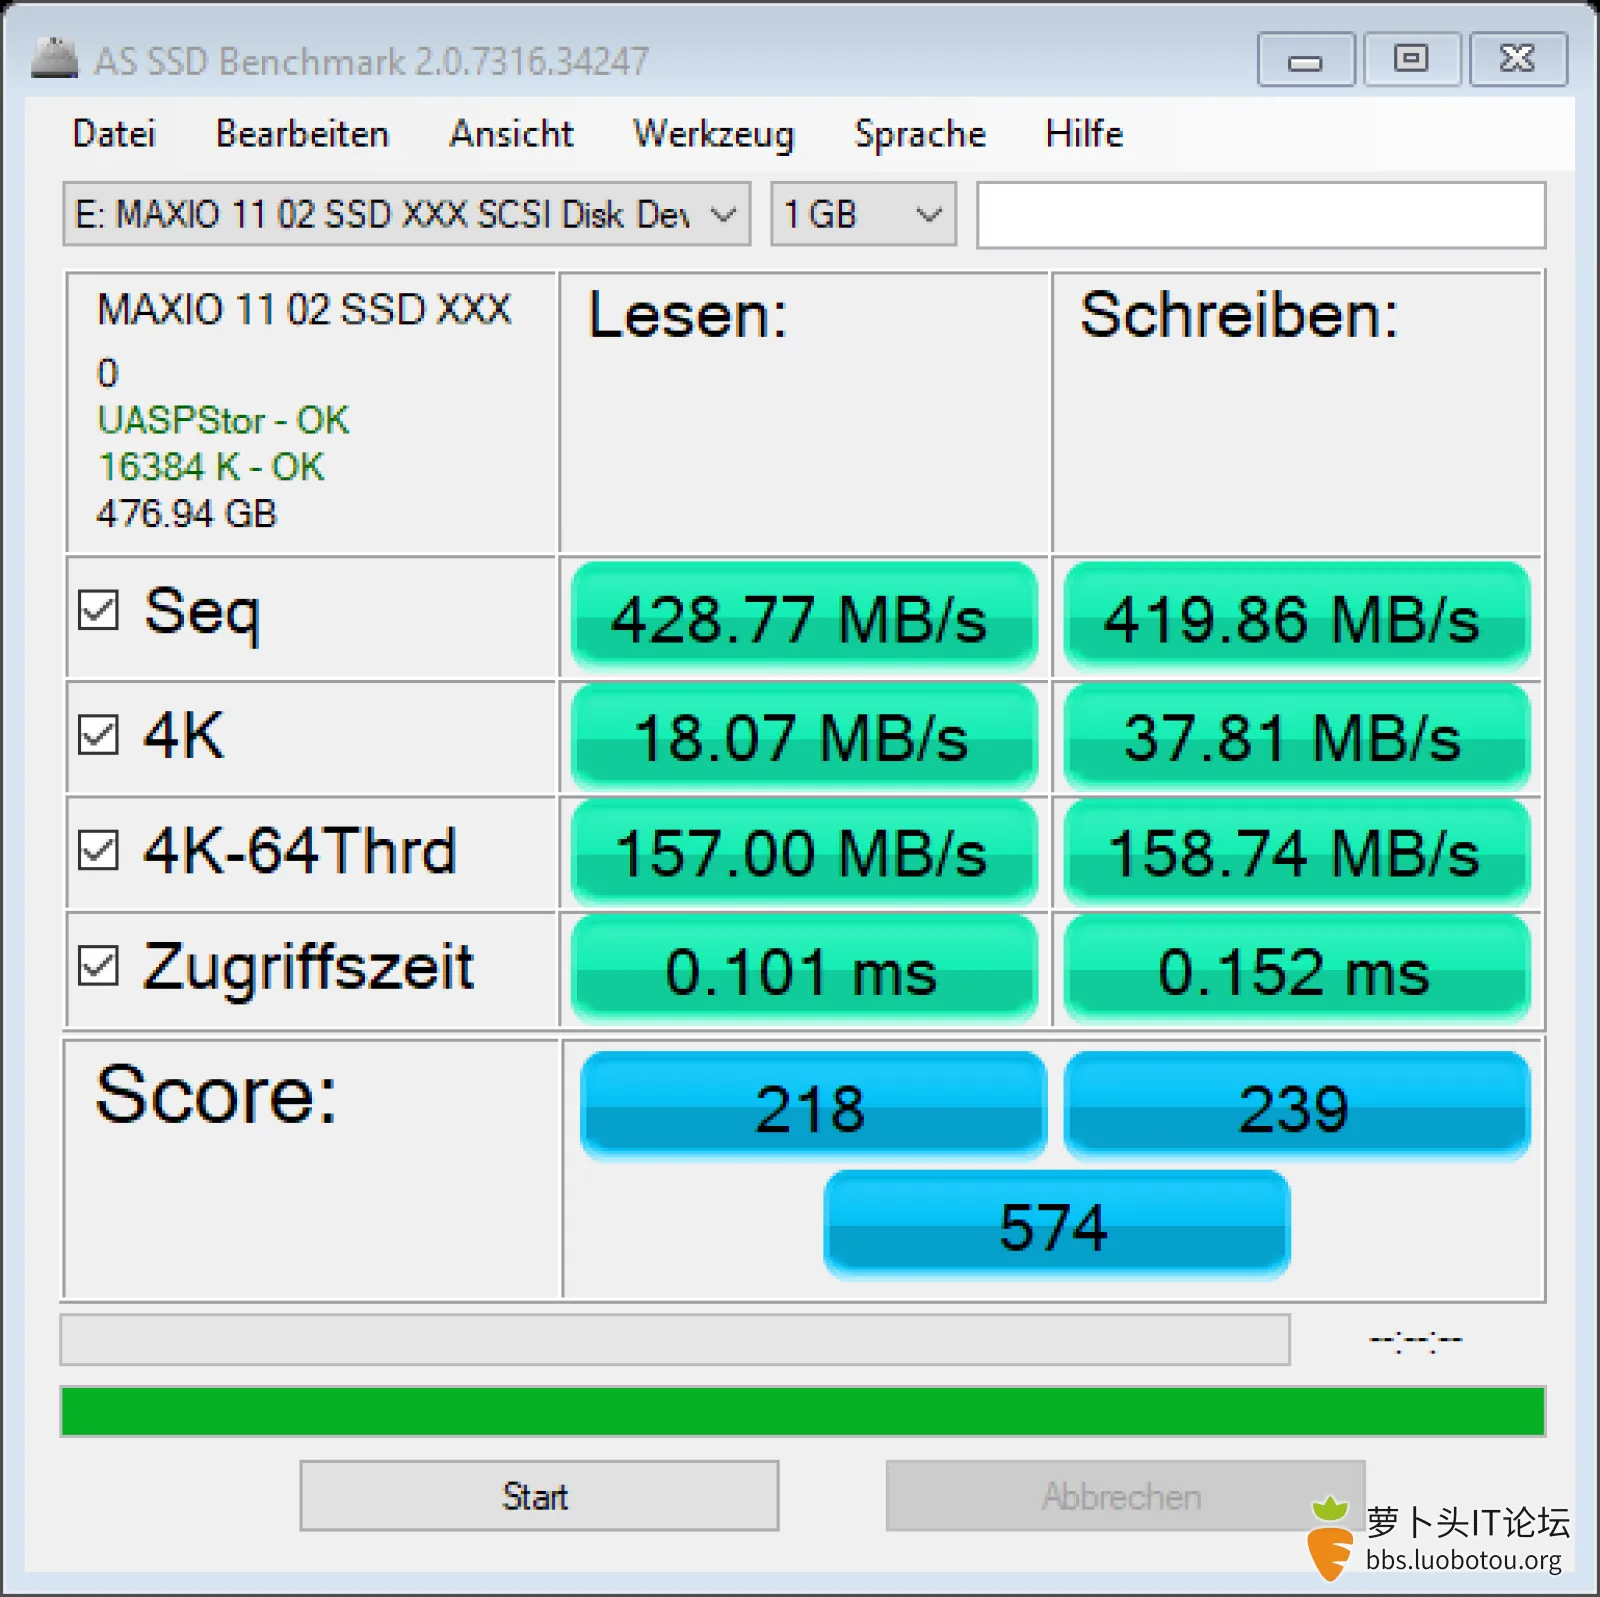 as-ssd-bench MAXIO 11 02 SSD  2023.4.29 11-52-54.png